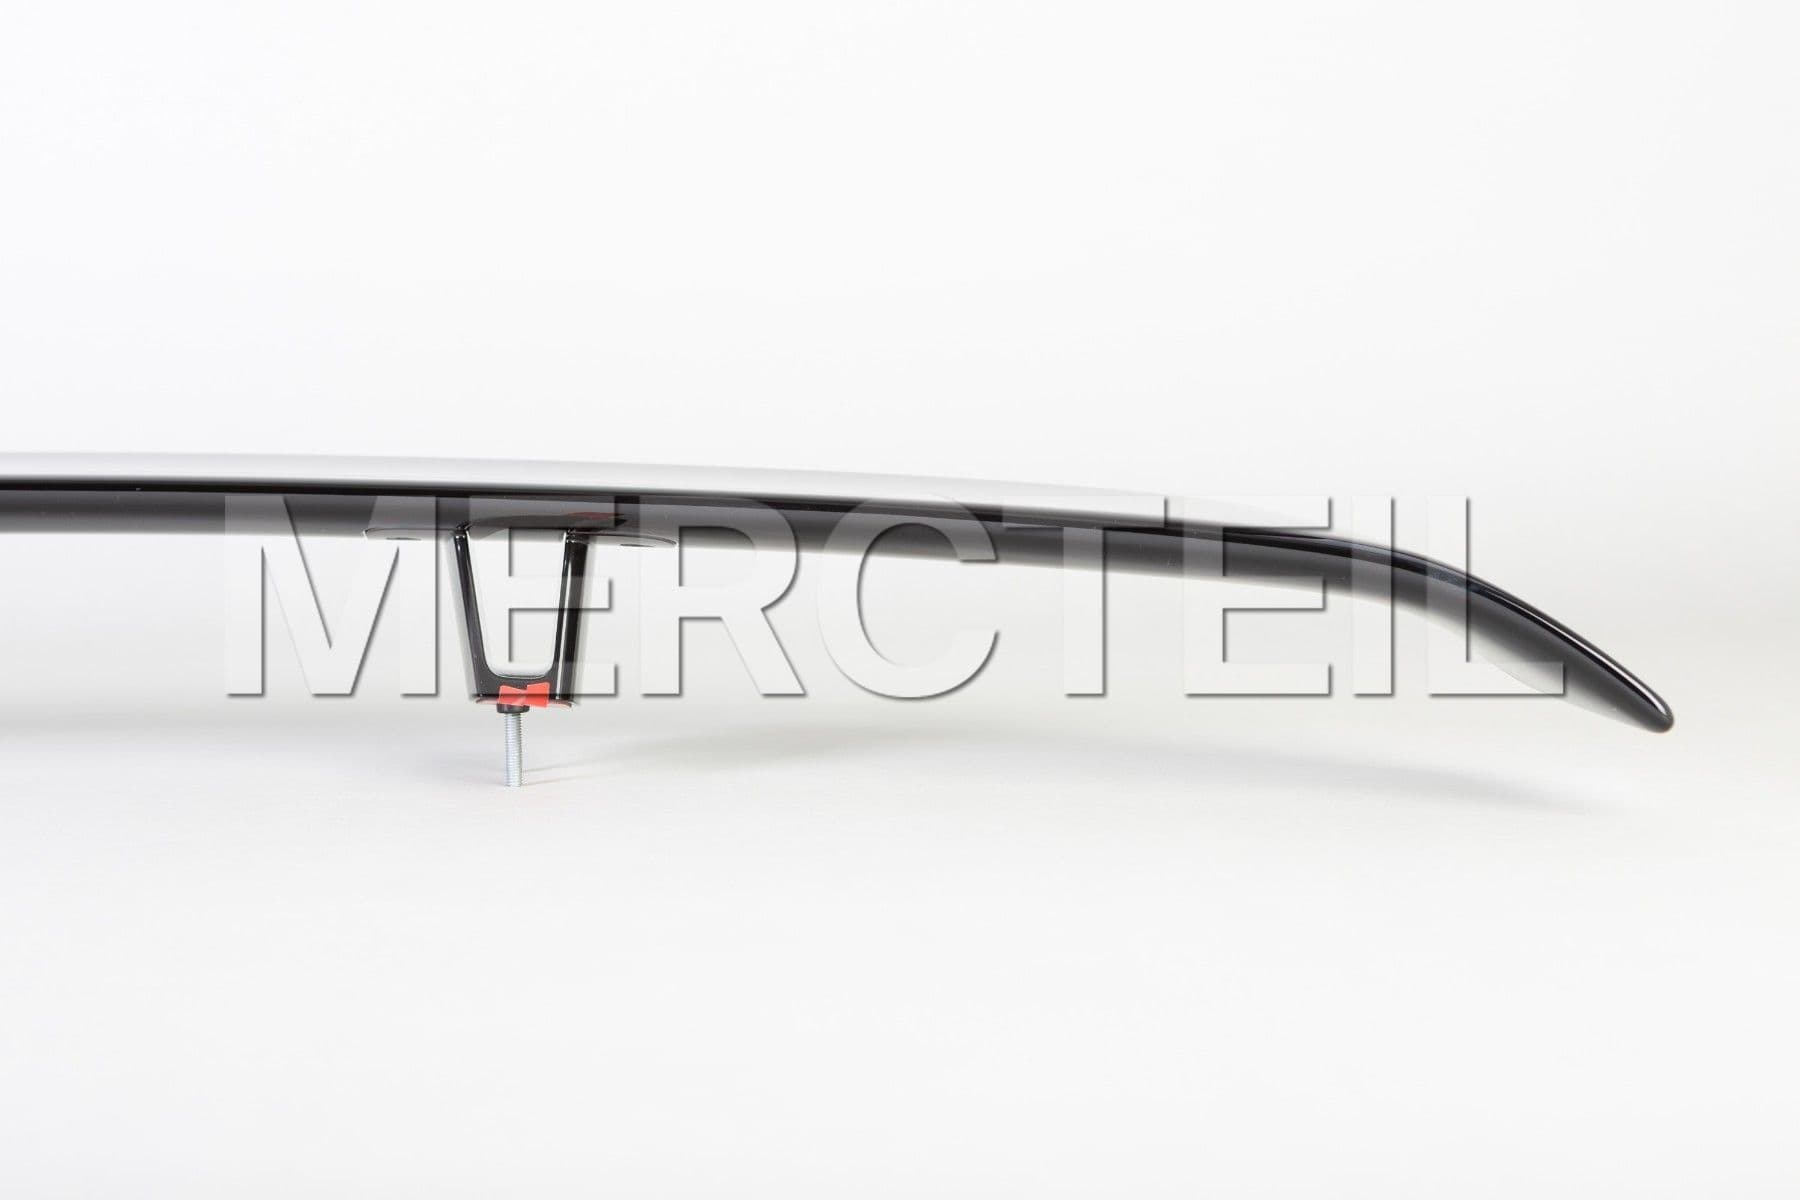 CLA45s AMG Static Rear Spoiler C118 Genuine Mercedes AMG (part number: 	
A1188840200)